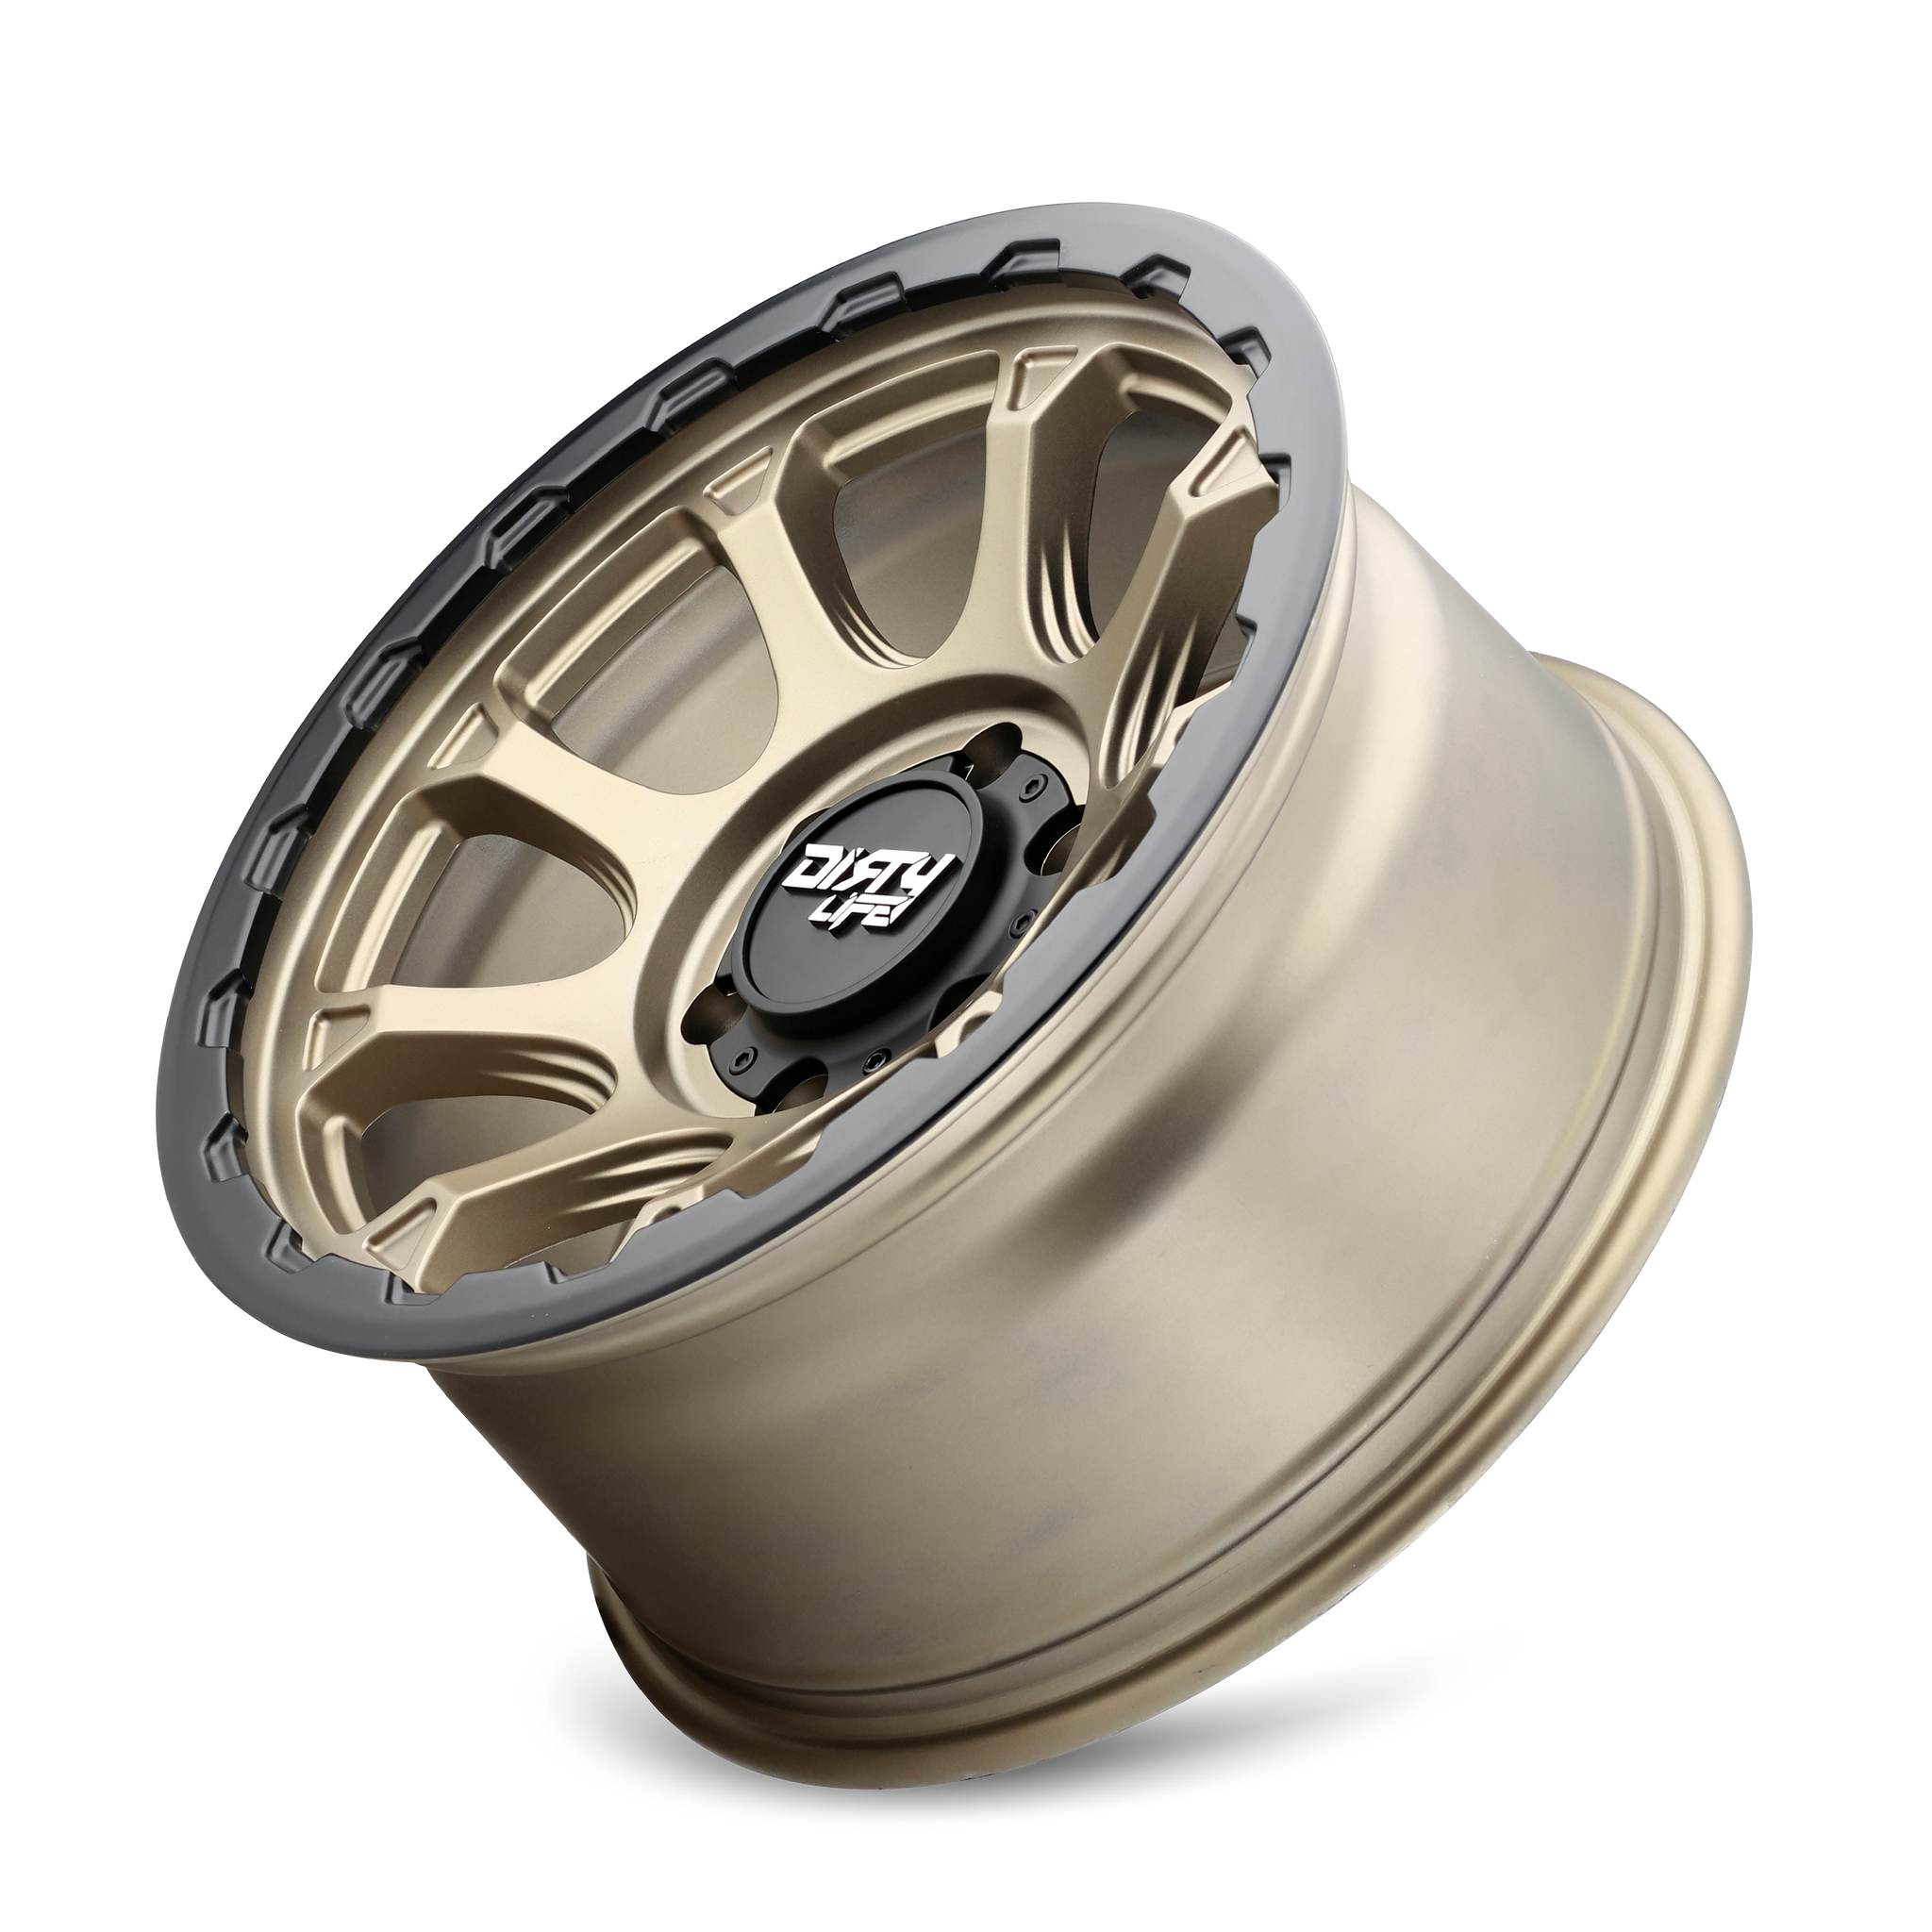 DIRTY LIFE DRIFTER 9307 17X8.5 -6 5x127 MATTE GOLD W/SIMULATED RING